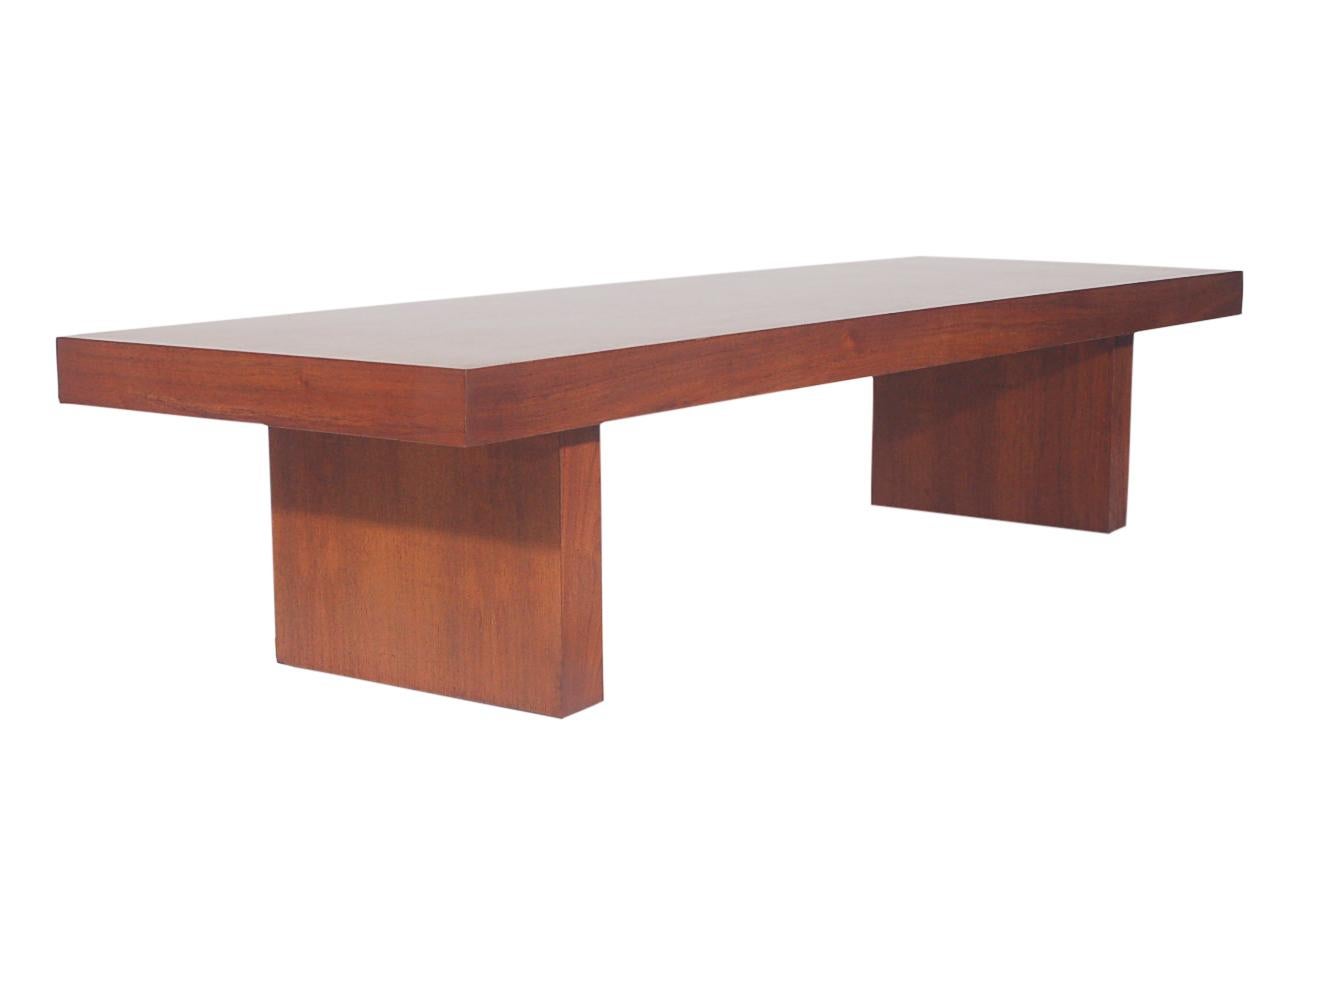 A simple and gorgeous coffee table by Showpieces Inc. in the 1960s. It features all wood construction with a beautifully grained walnut finish. Table has been recently restored. Can be used as bench or long cocktail table.